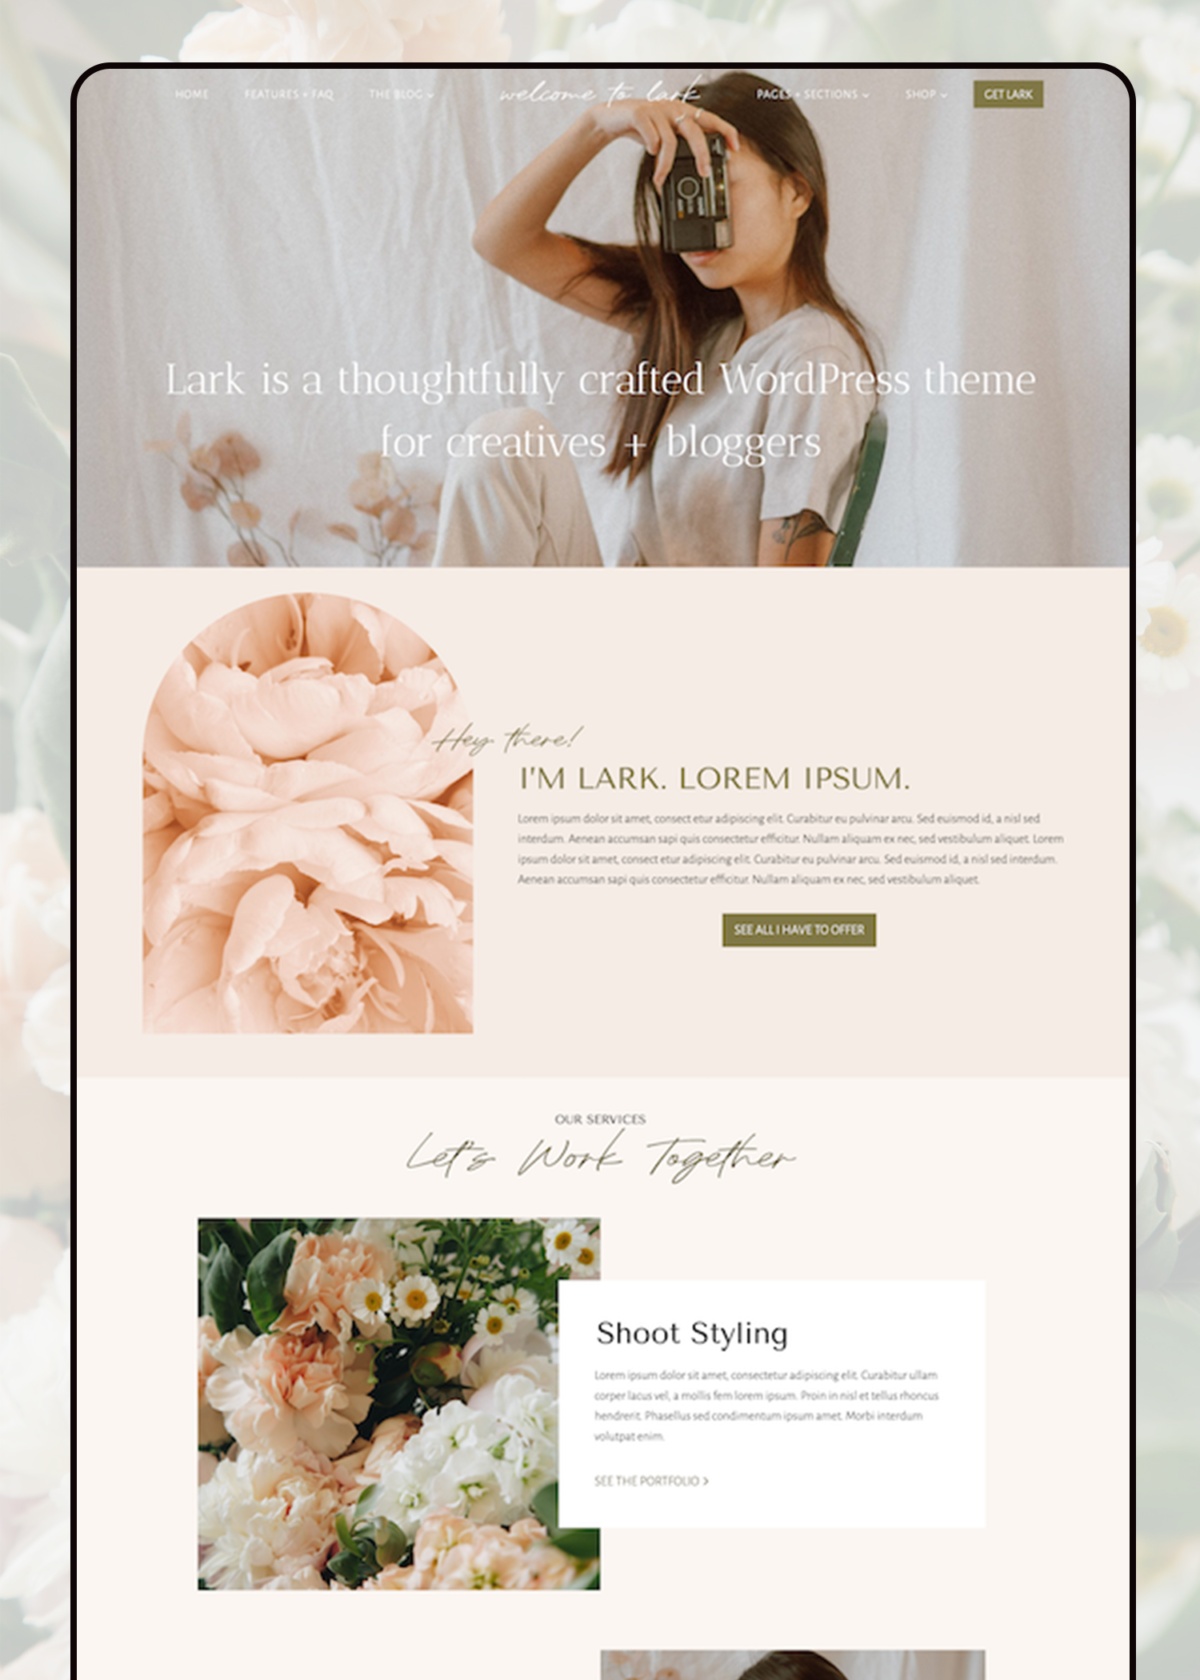 Image showing the Lark WordPress theme home page on an iPad. Background is a semi-transparent image of flowers.